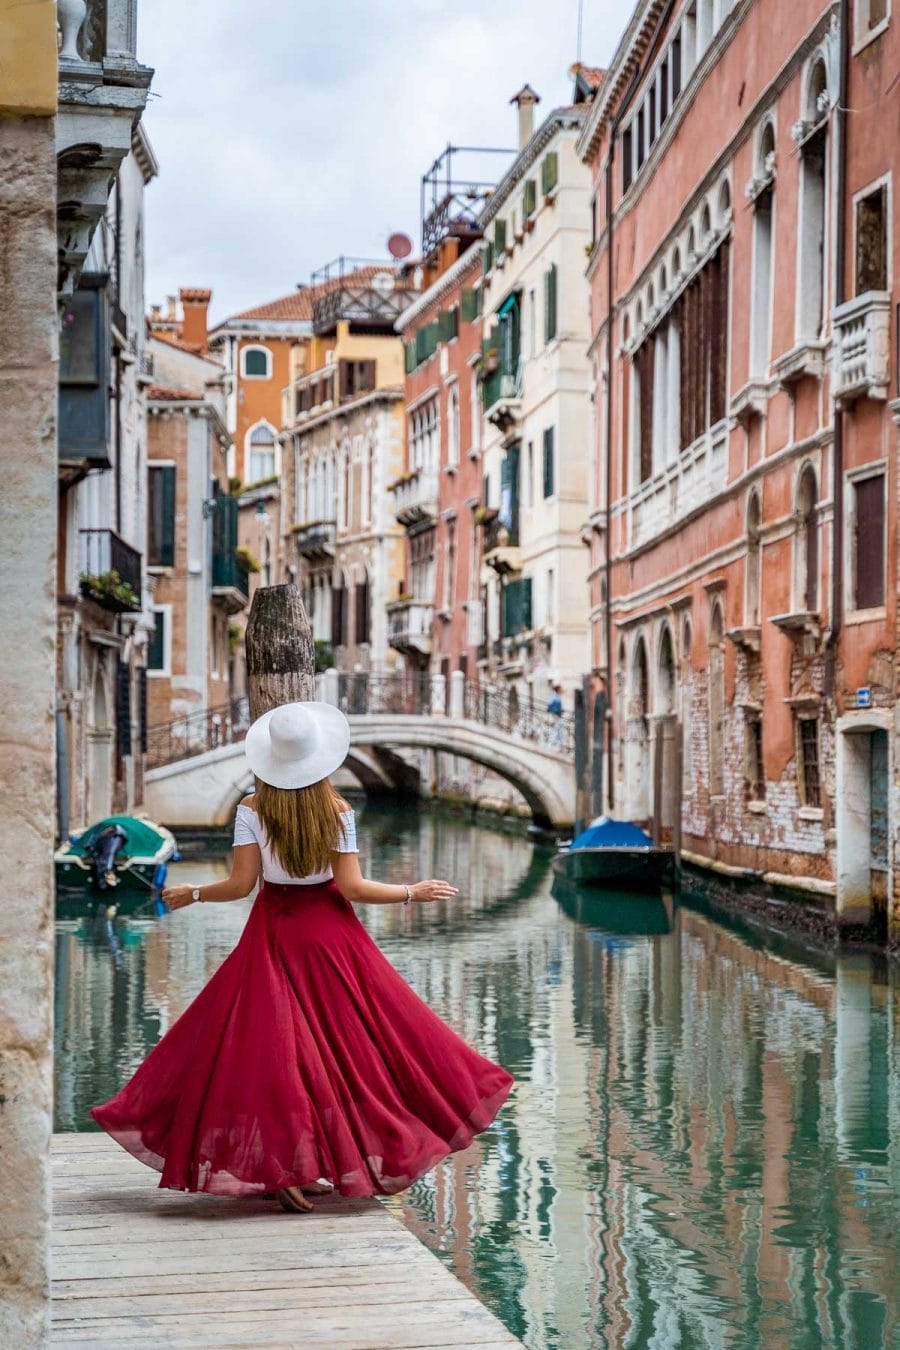 Girl in a red skirt twirling on a little pier along the canals in Venice